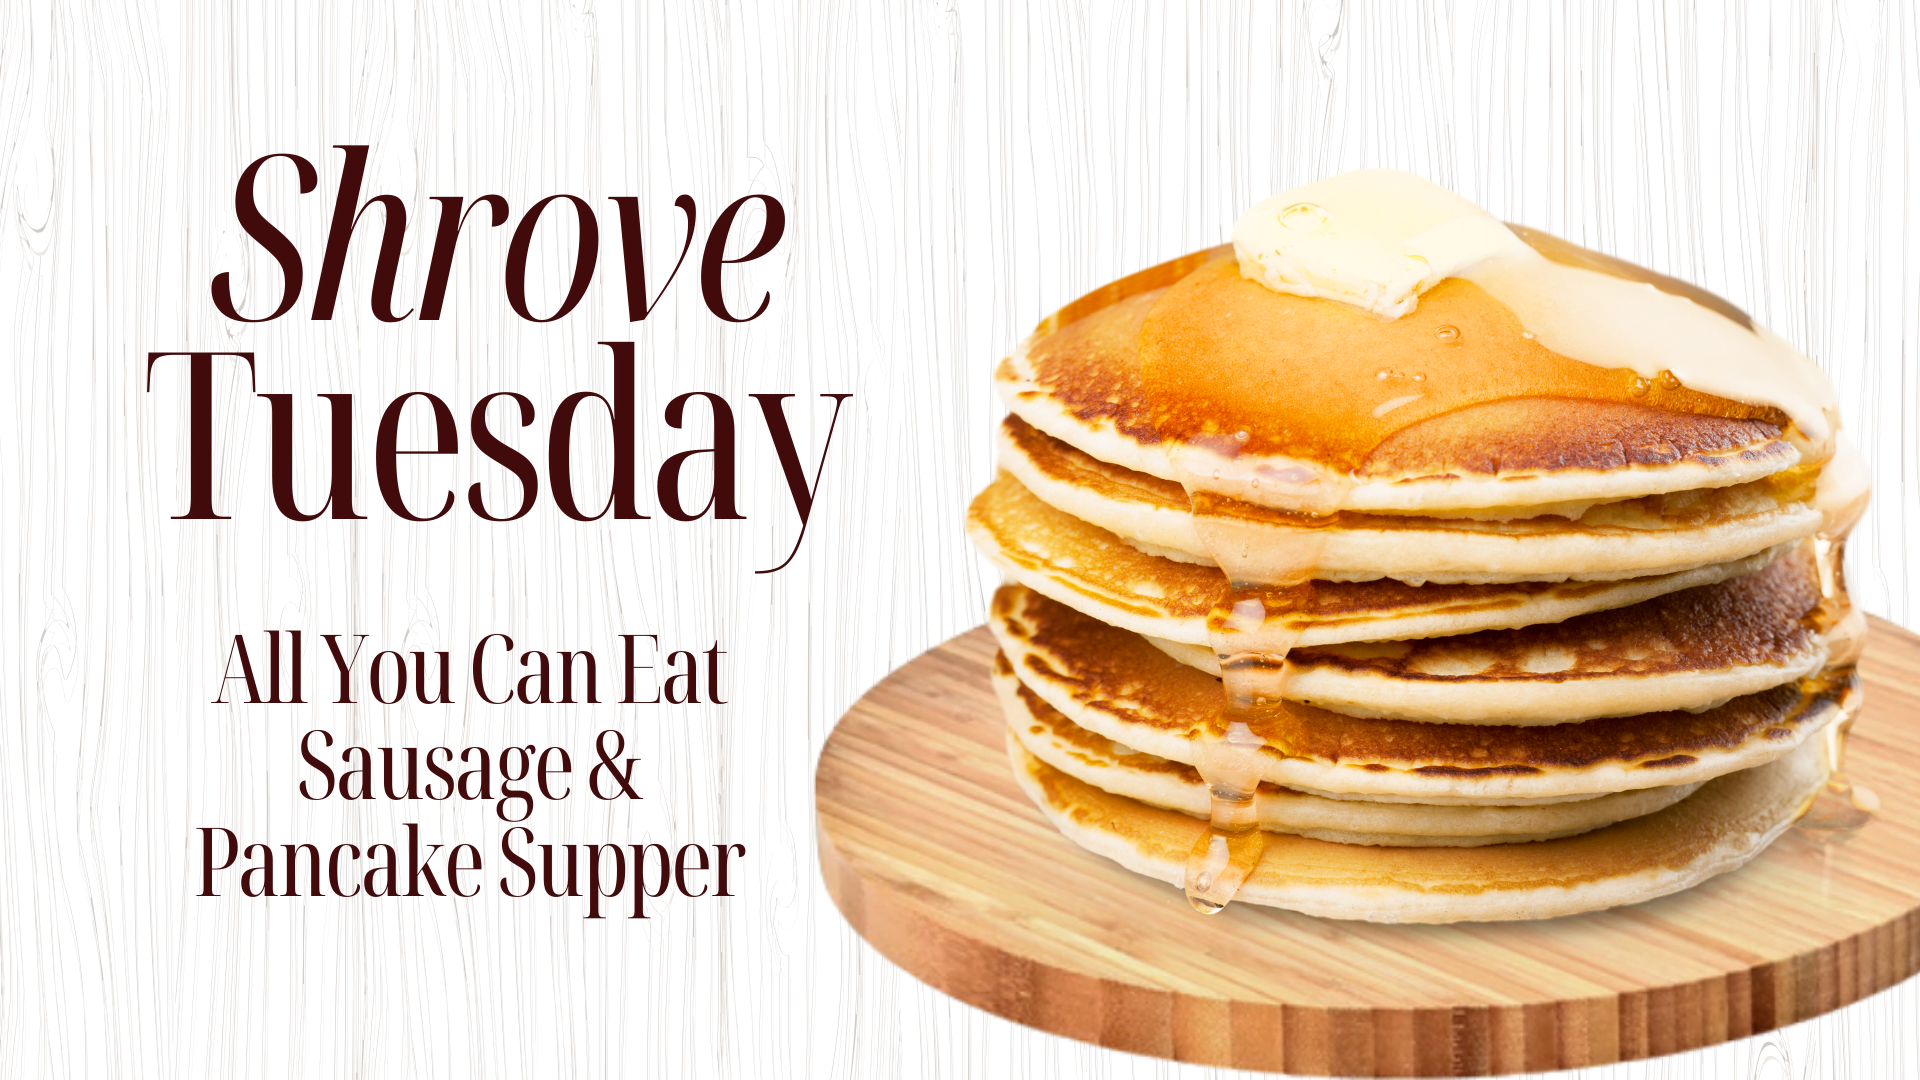 Shrove Tuesday Pancake and Sausage Supper